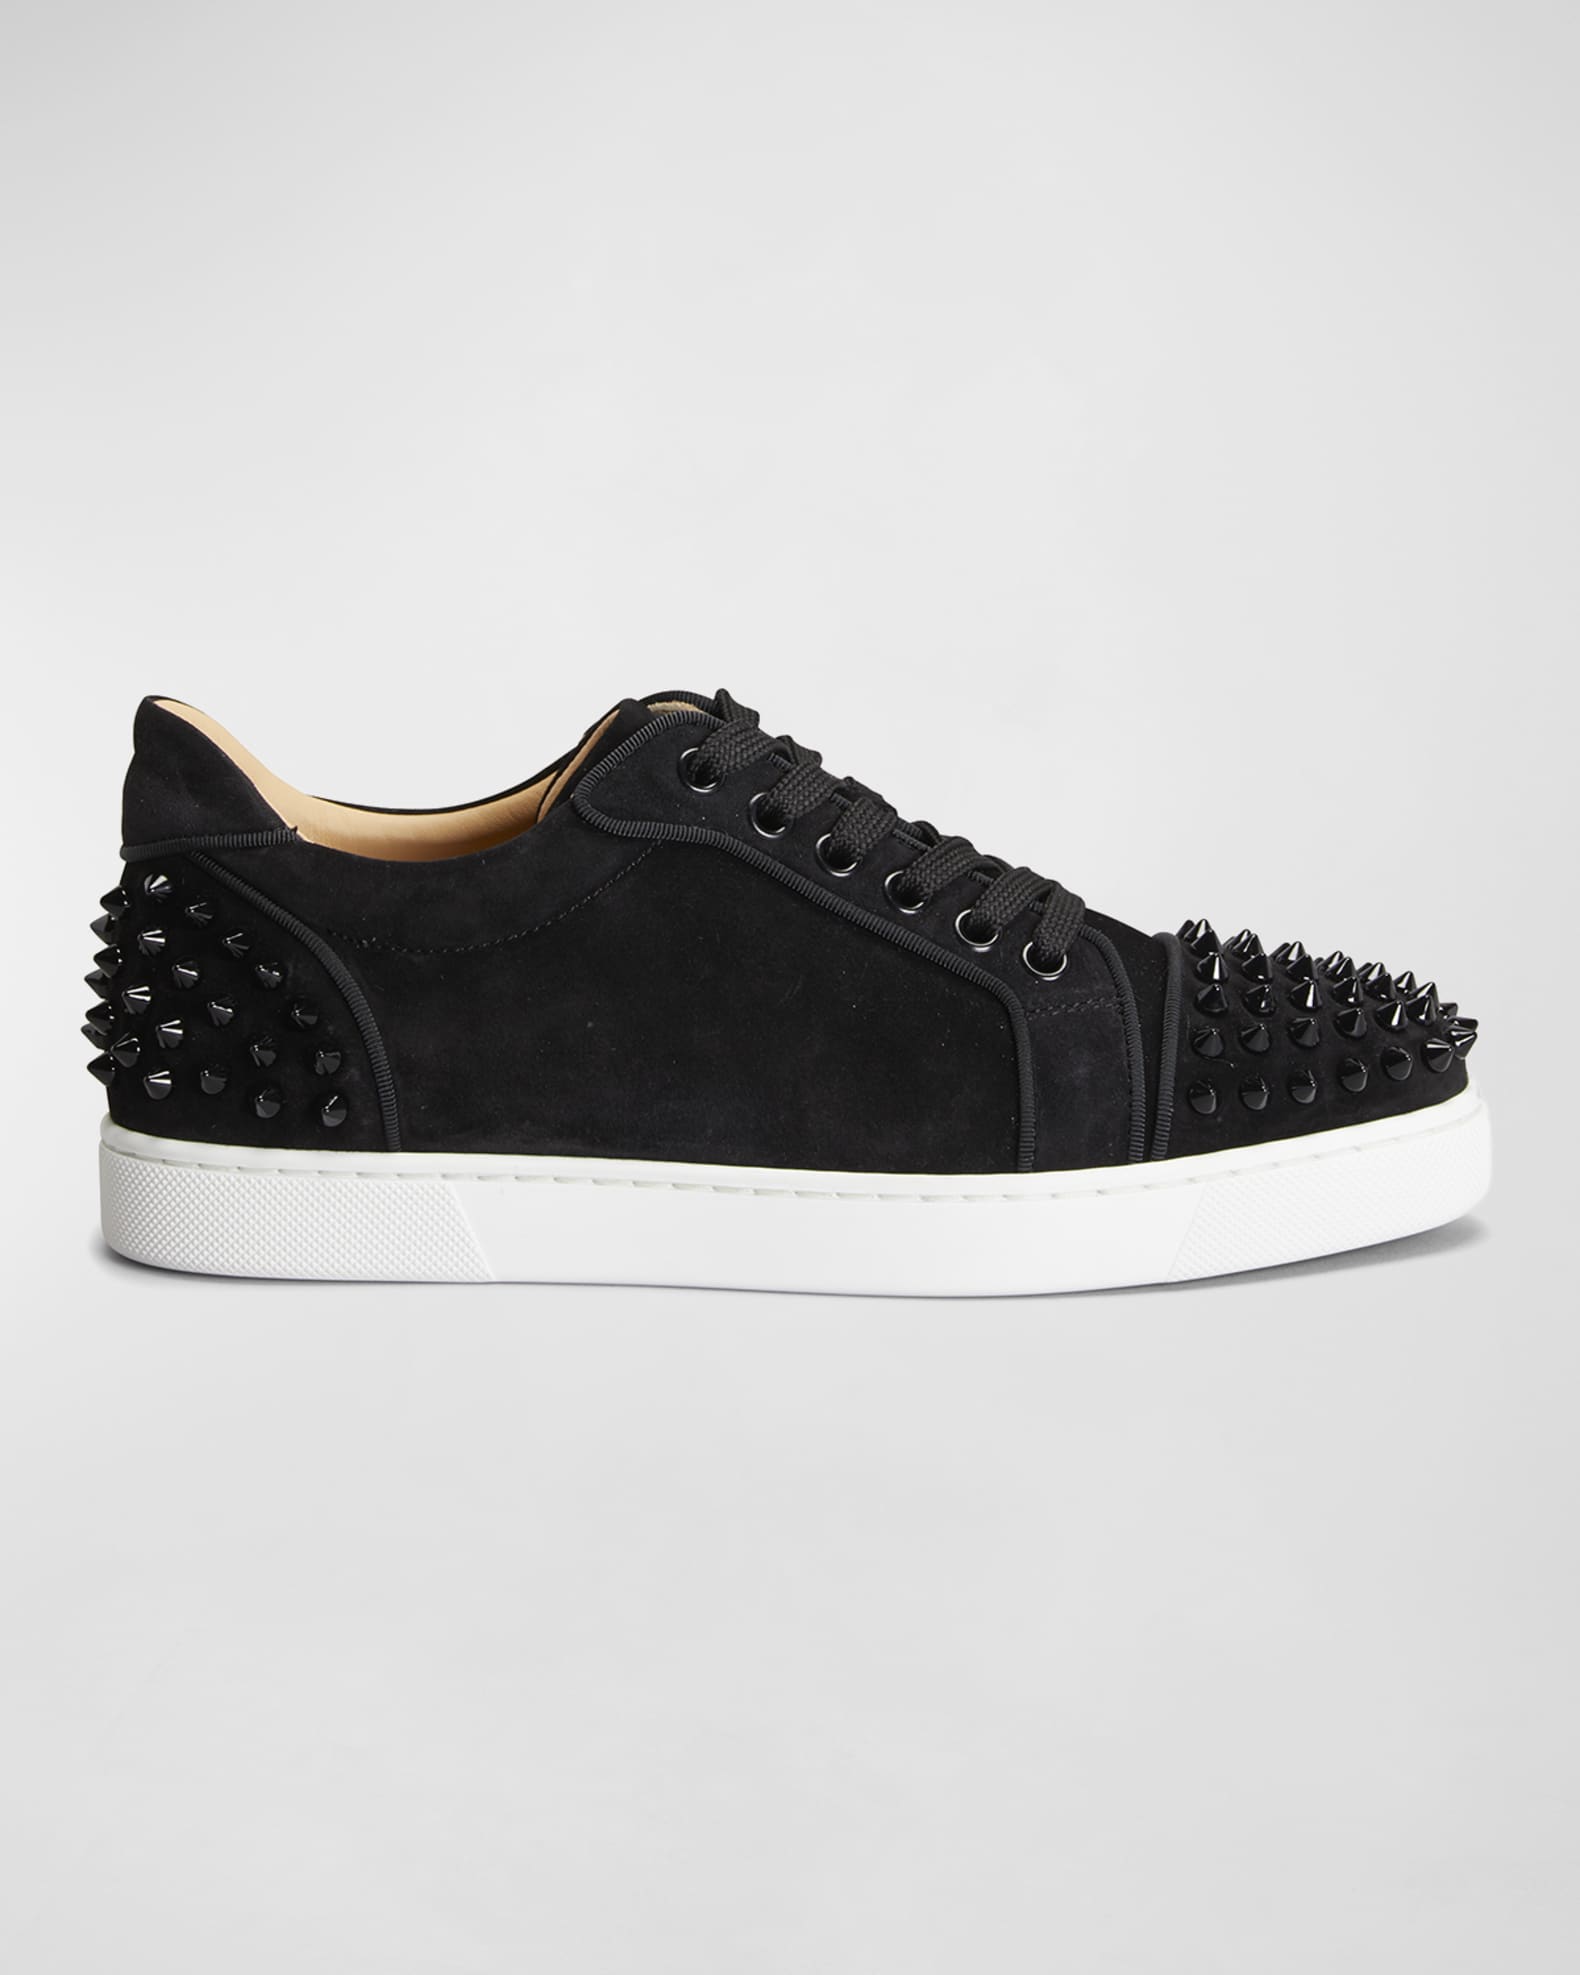 Louis Junior Spikes suede sneakers in blue - Christian Louboutin